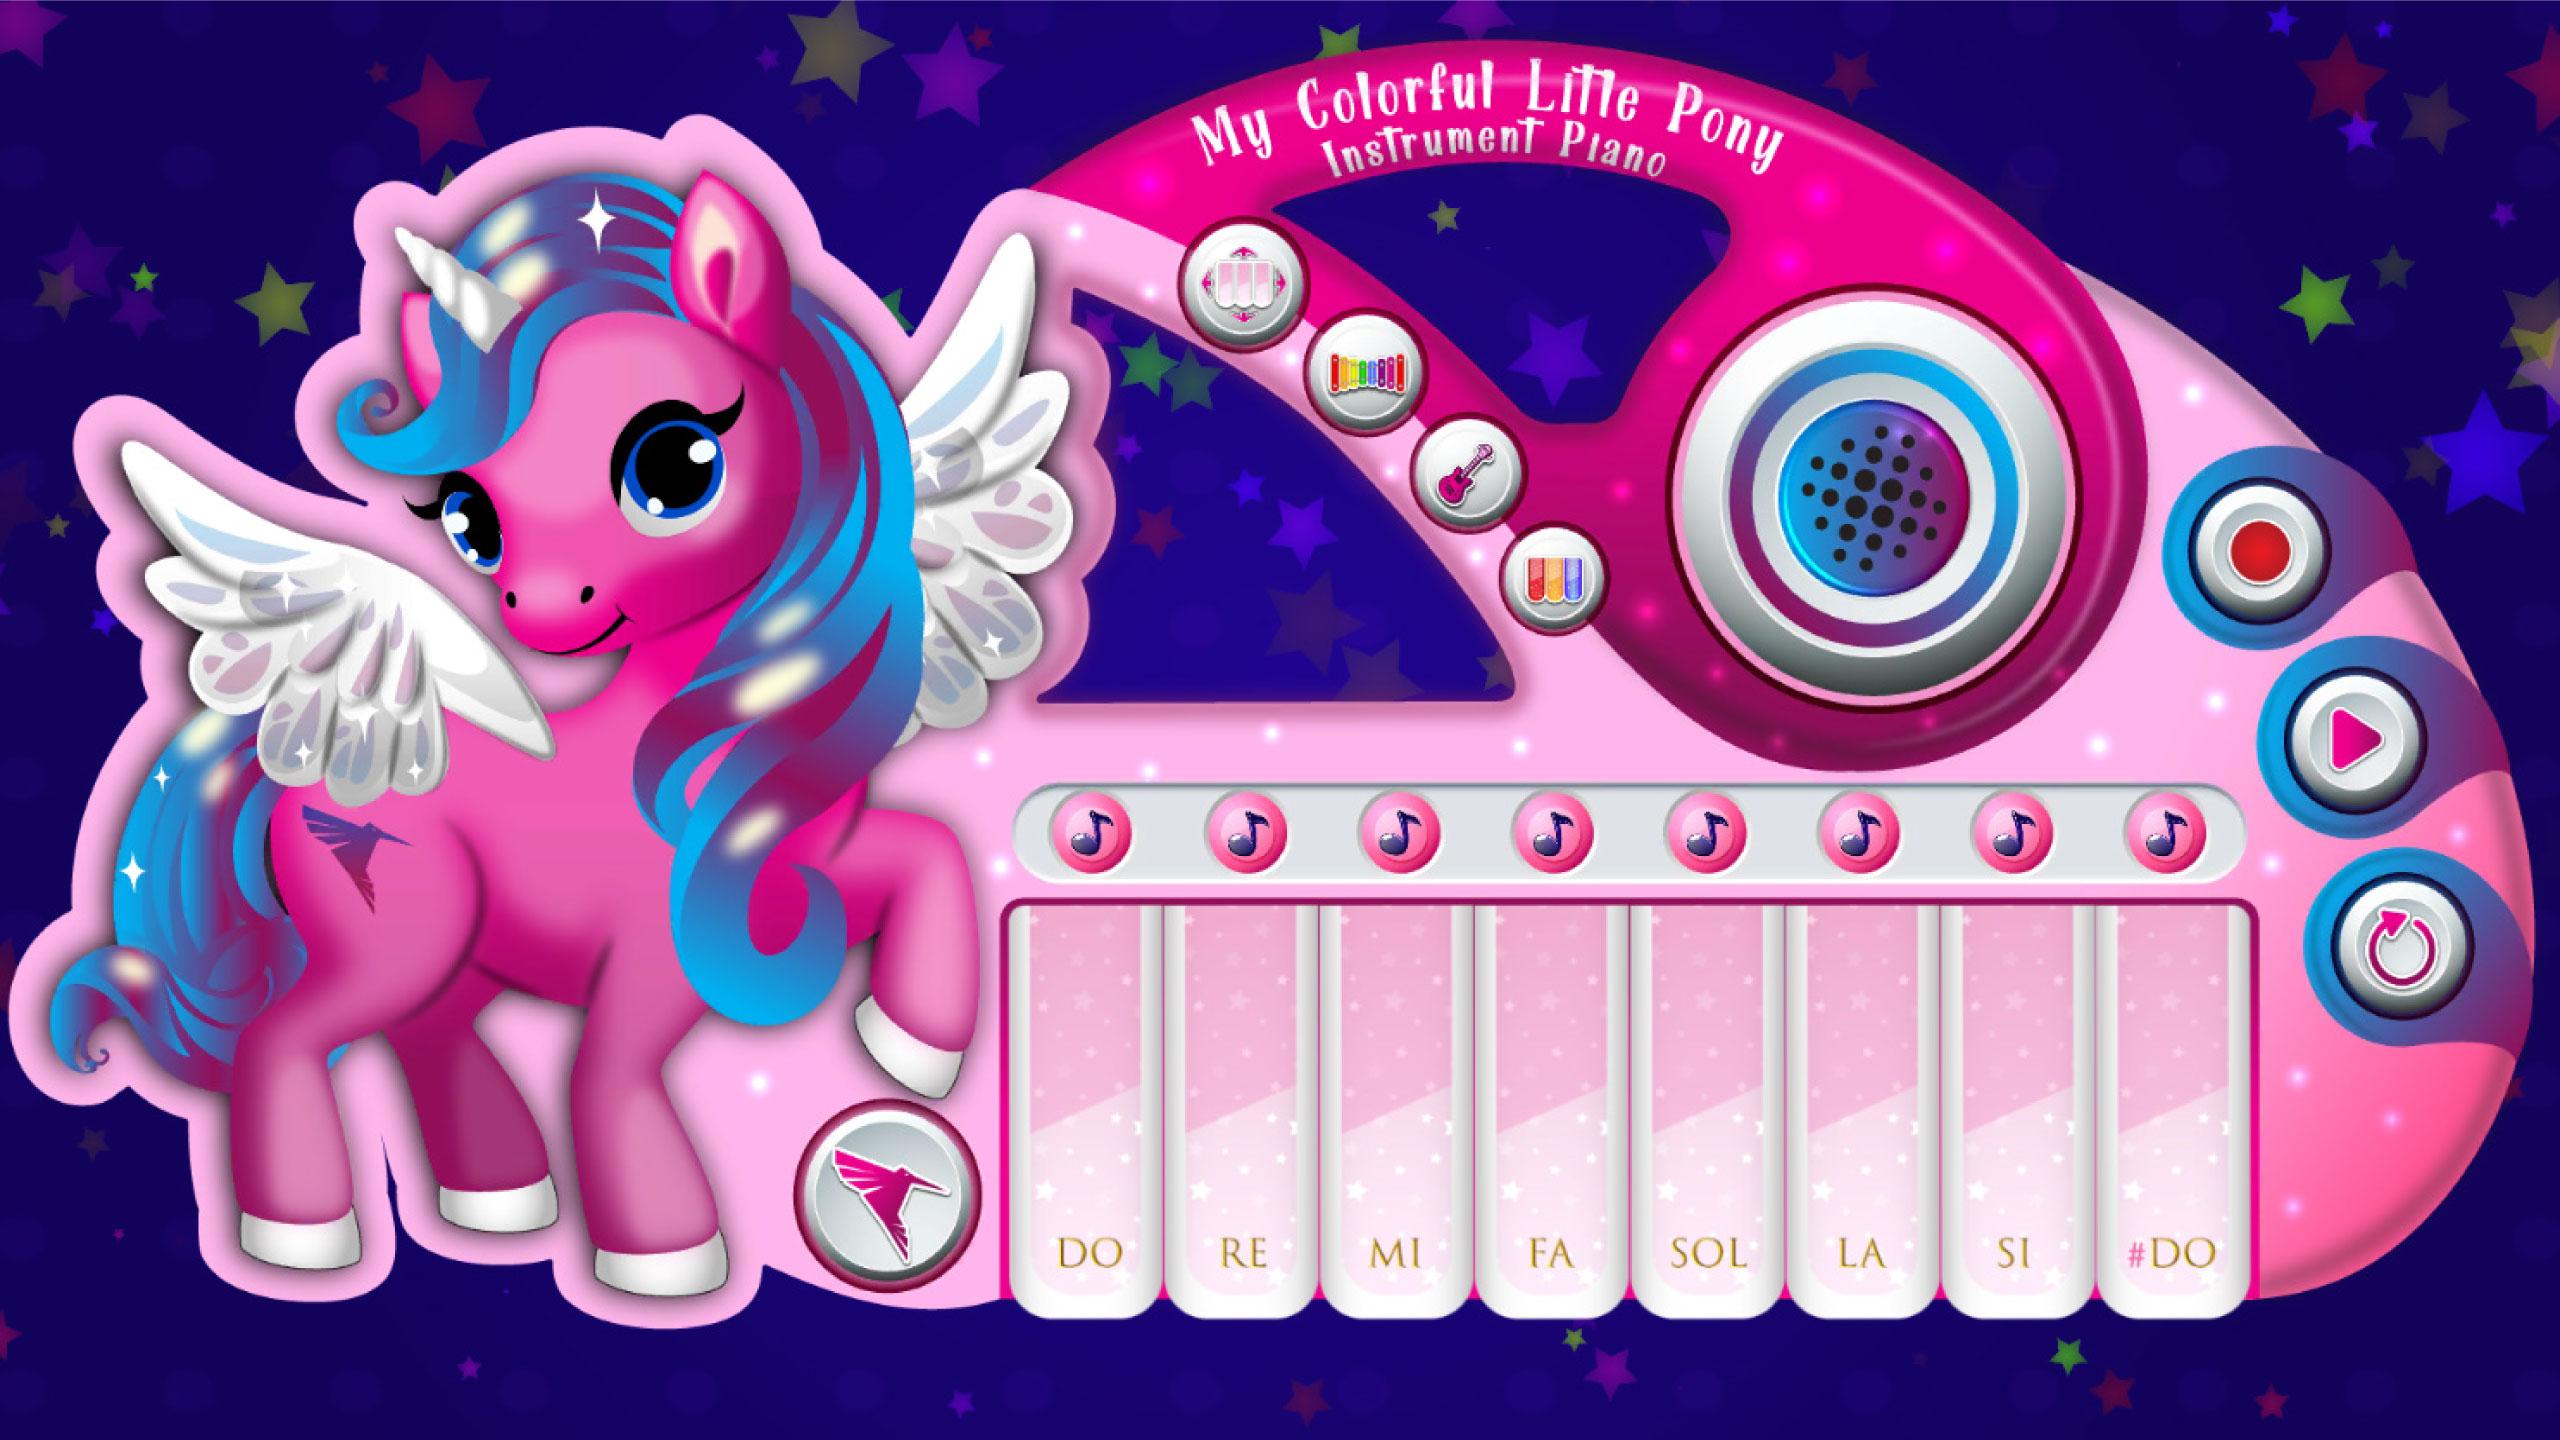 My Colorful Litle Pony Instrument - Piano 2.0 Screenshot 17